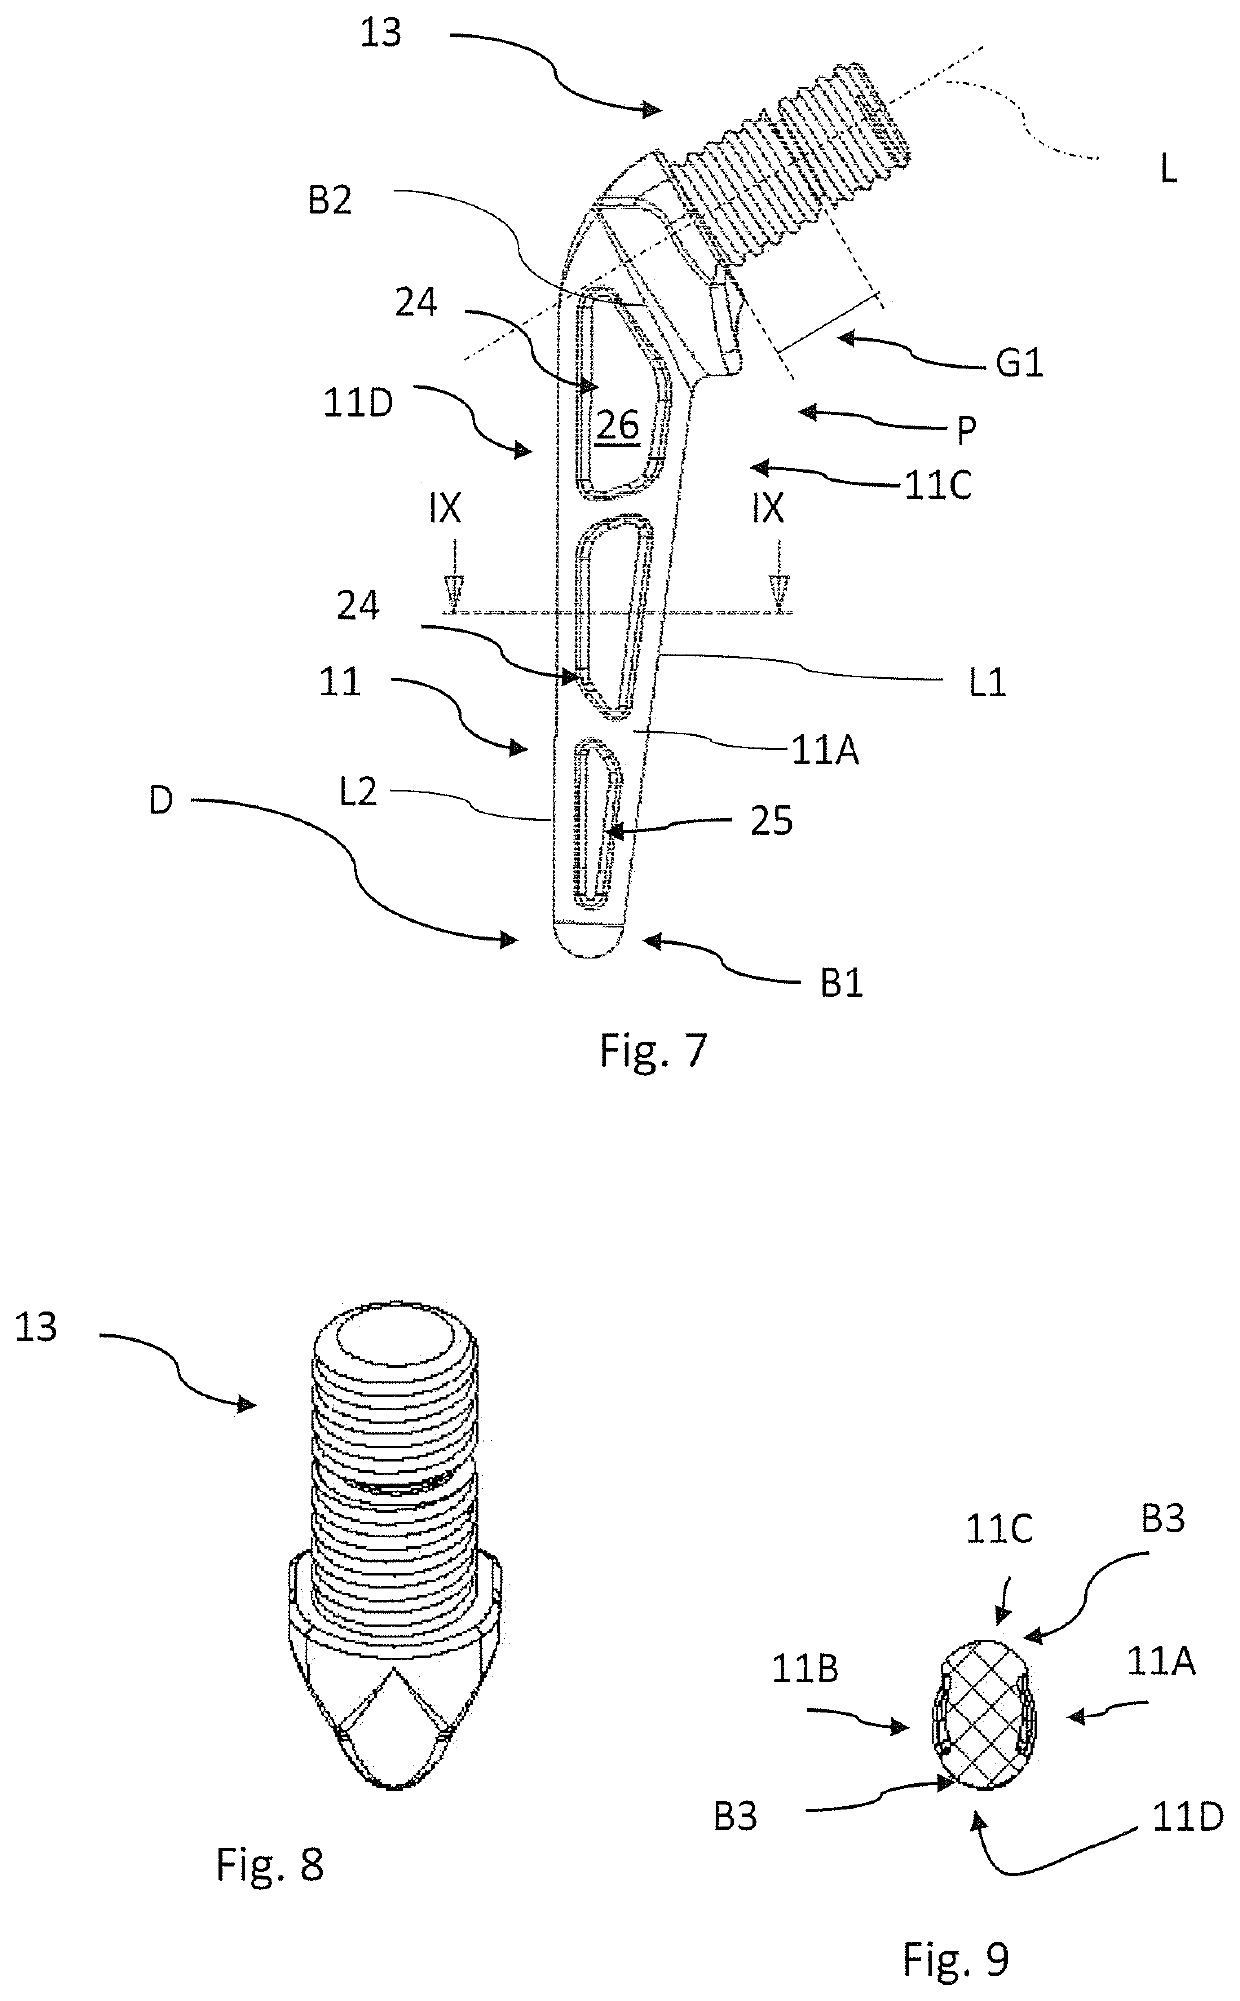 Spacer device for treating a joiny of the human body